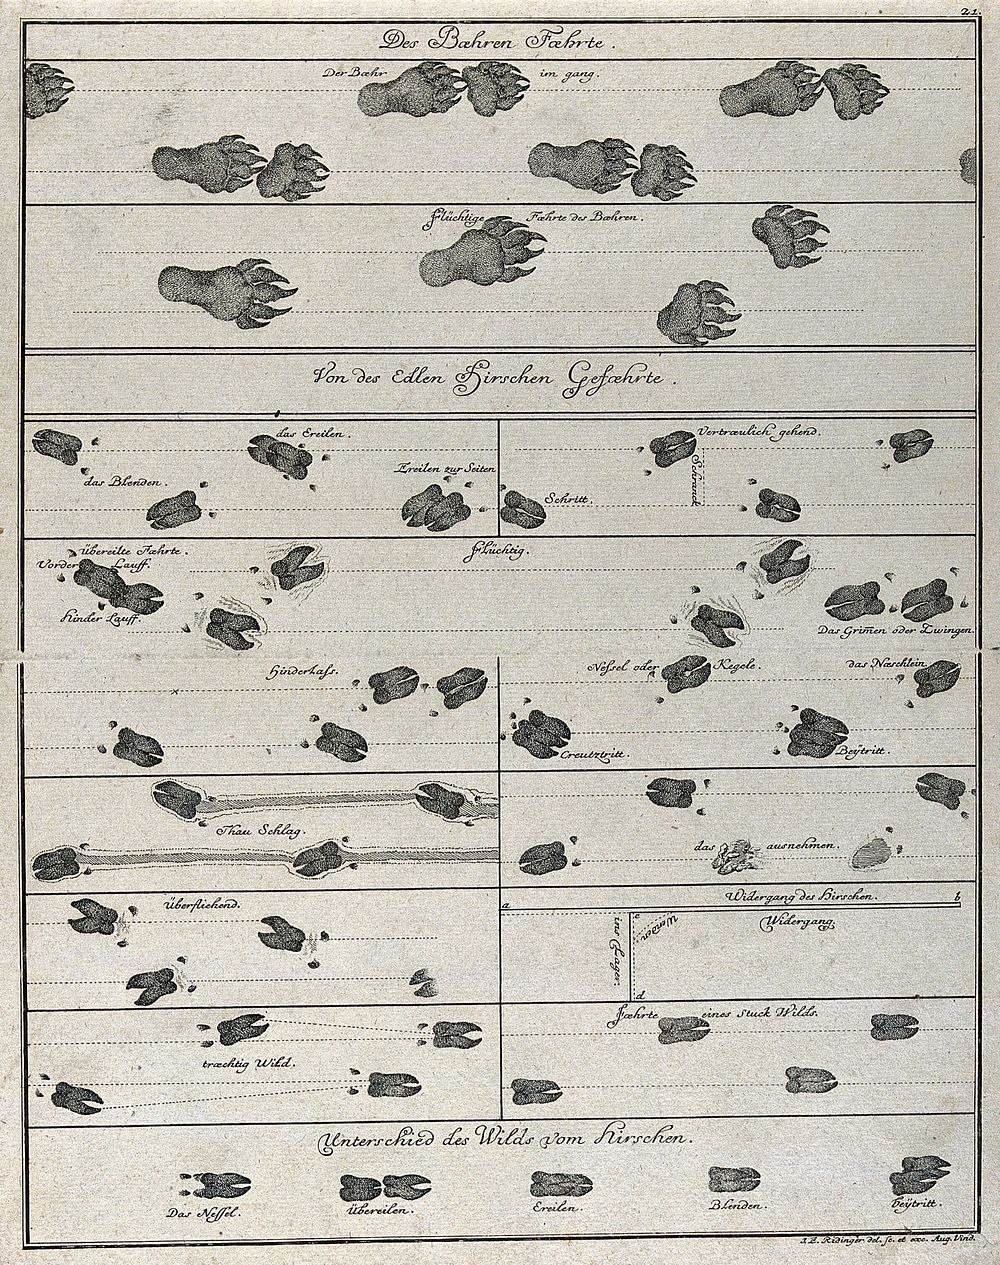 Different tracks of animals, including deer and bears, arranged in one table. Etching by J. E. Ridinger.